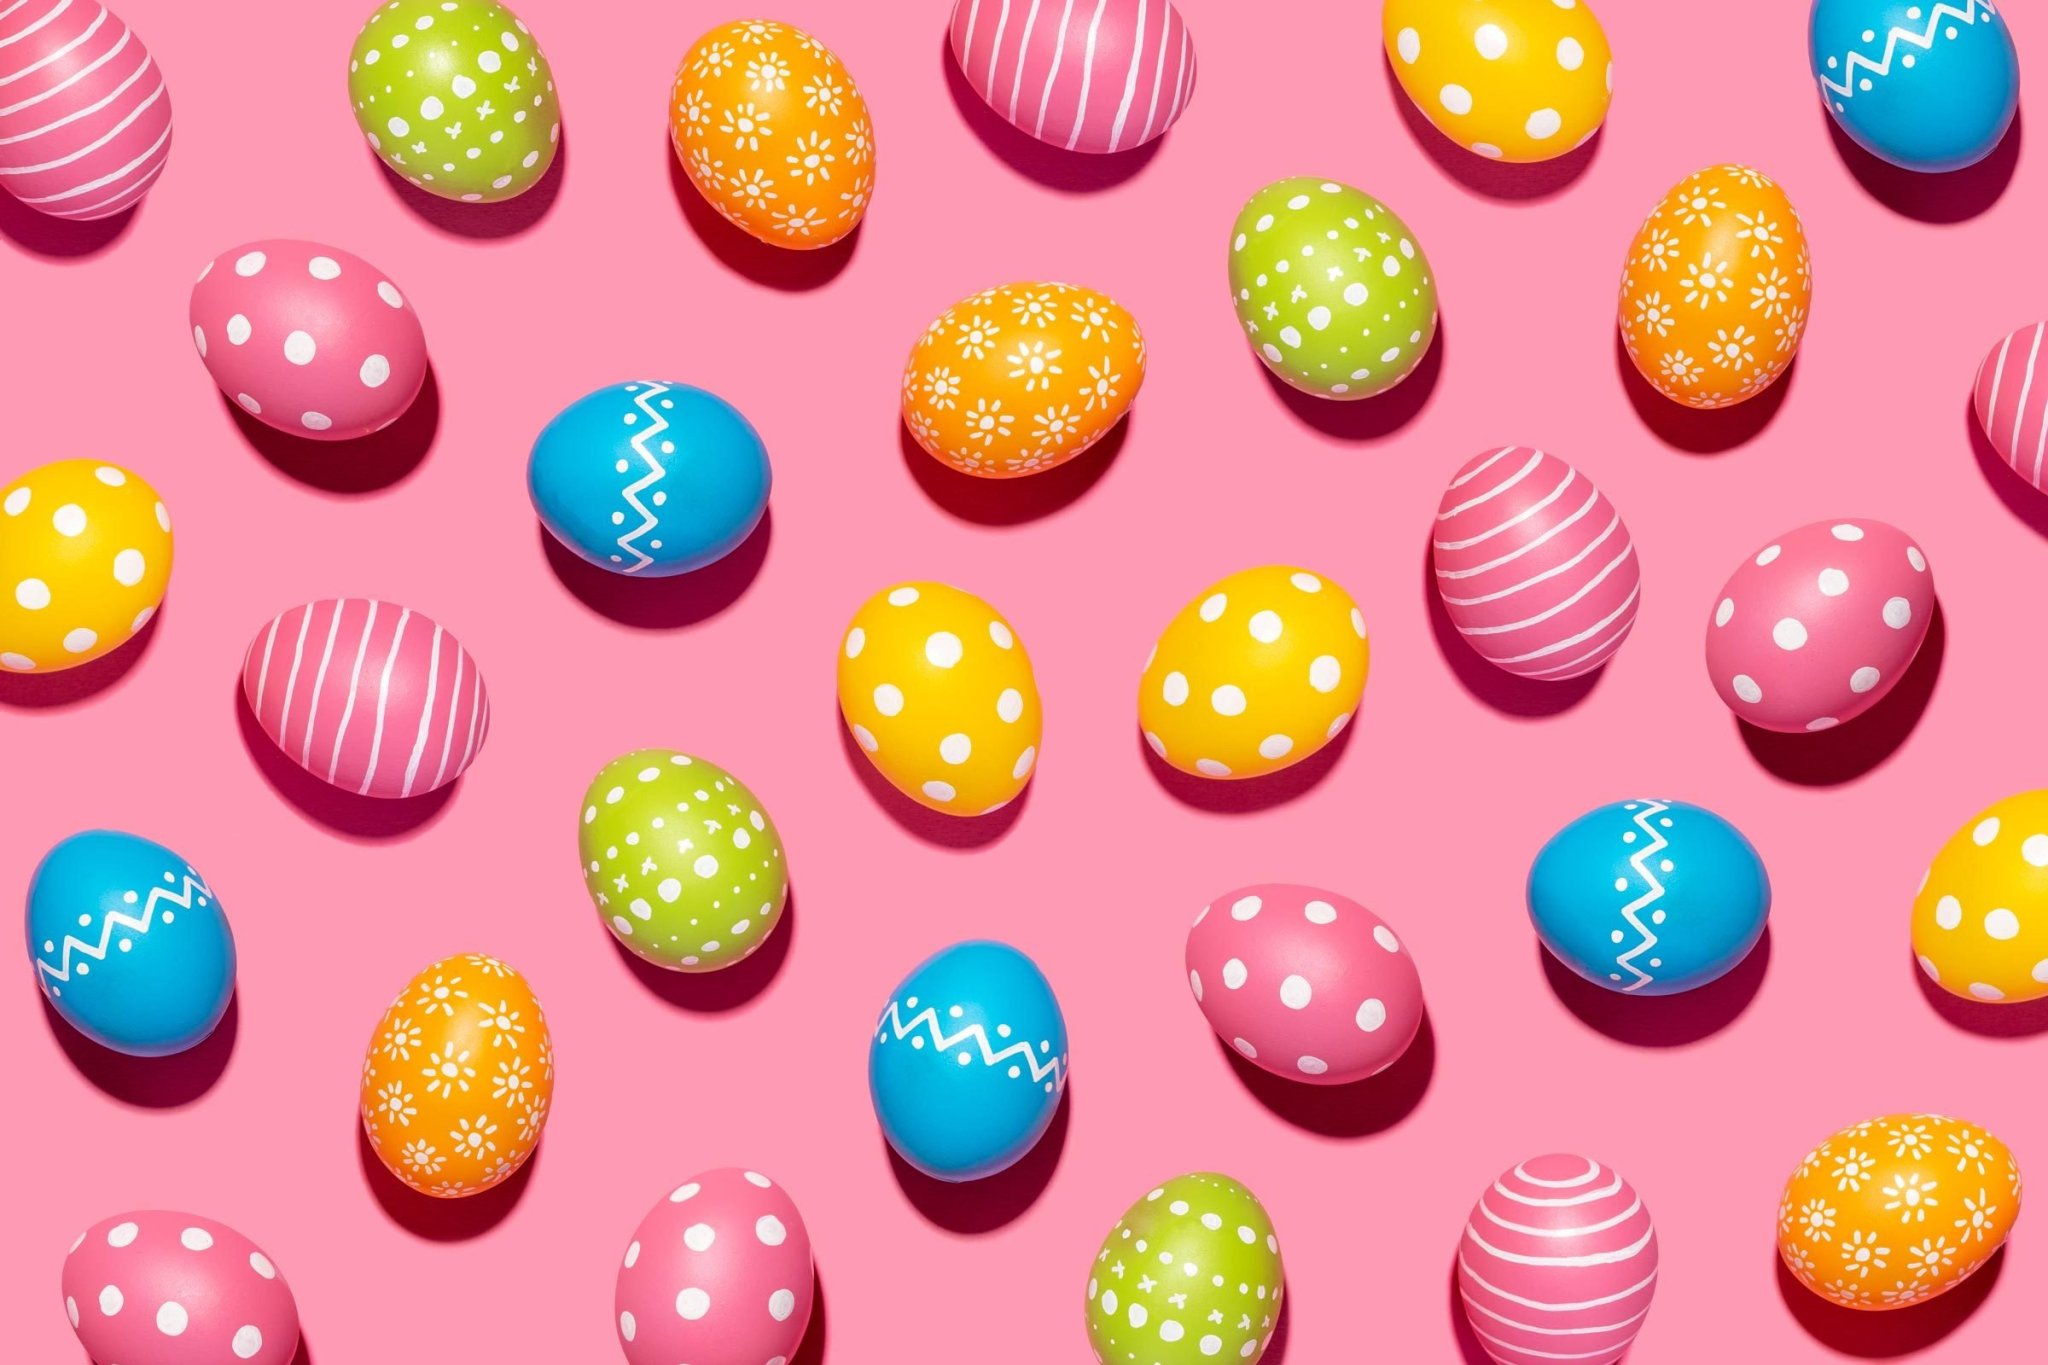 What Is Easter and Why Do We Celebrate It? | Flipboard